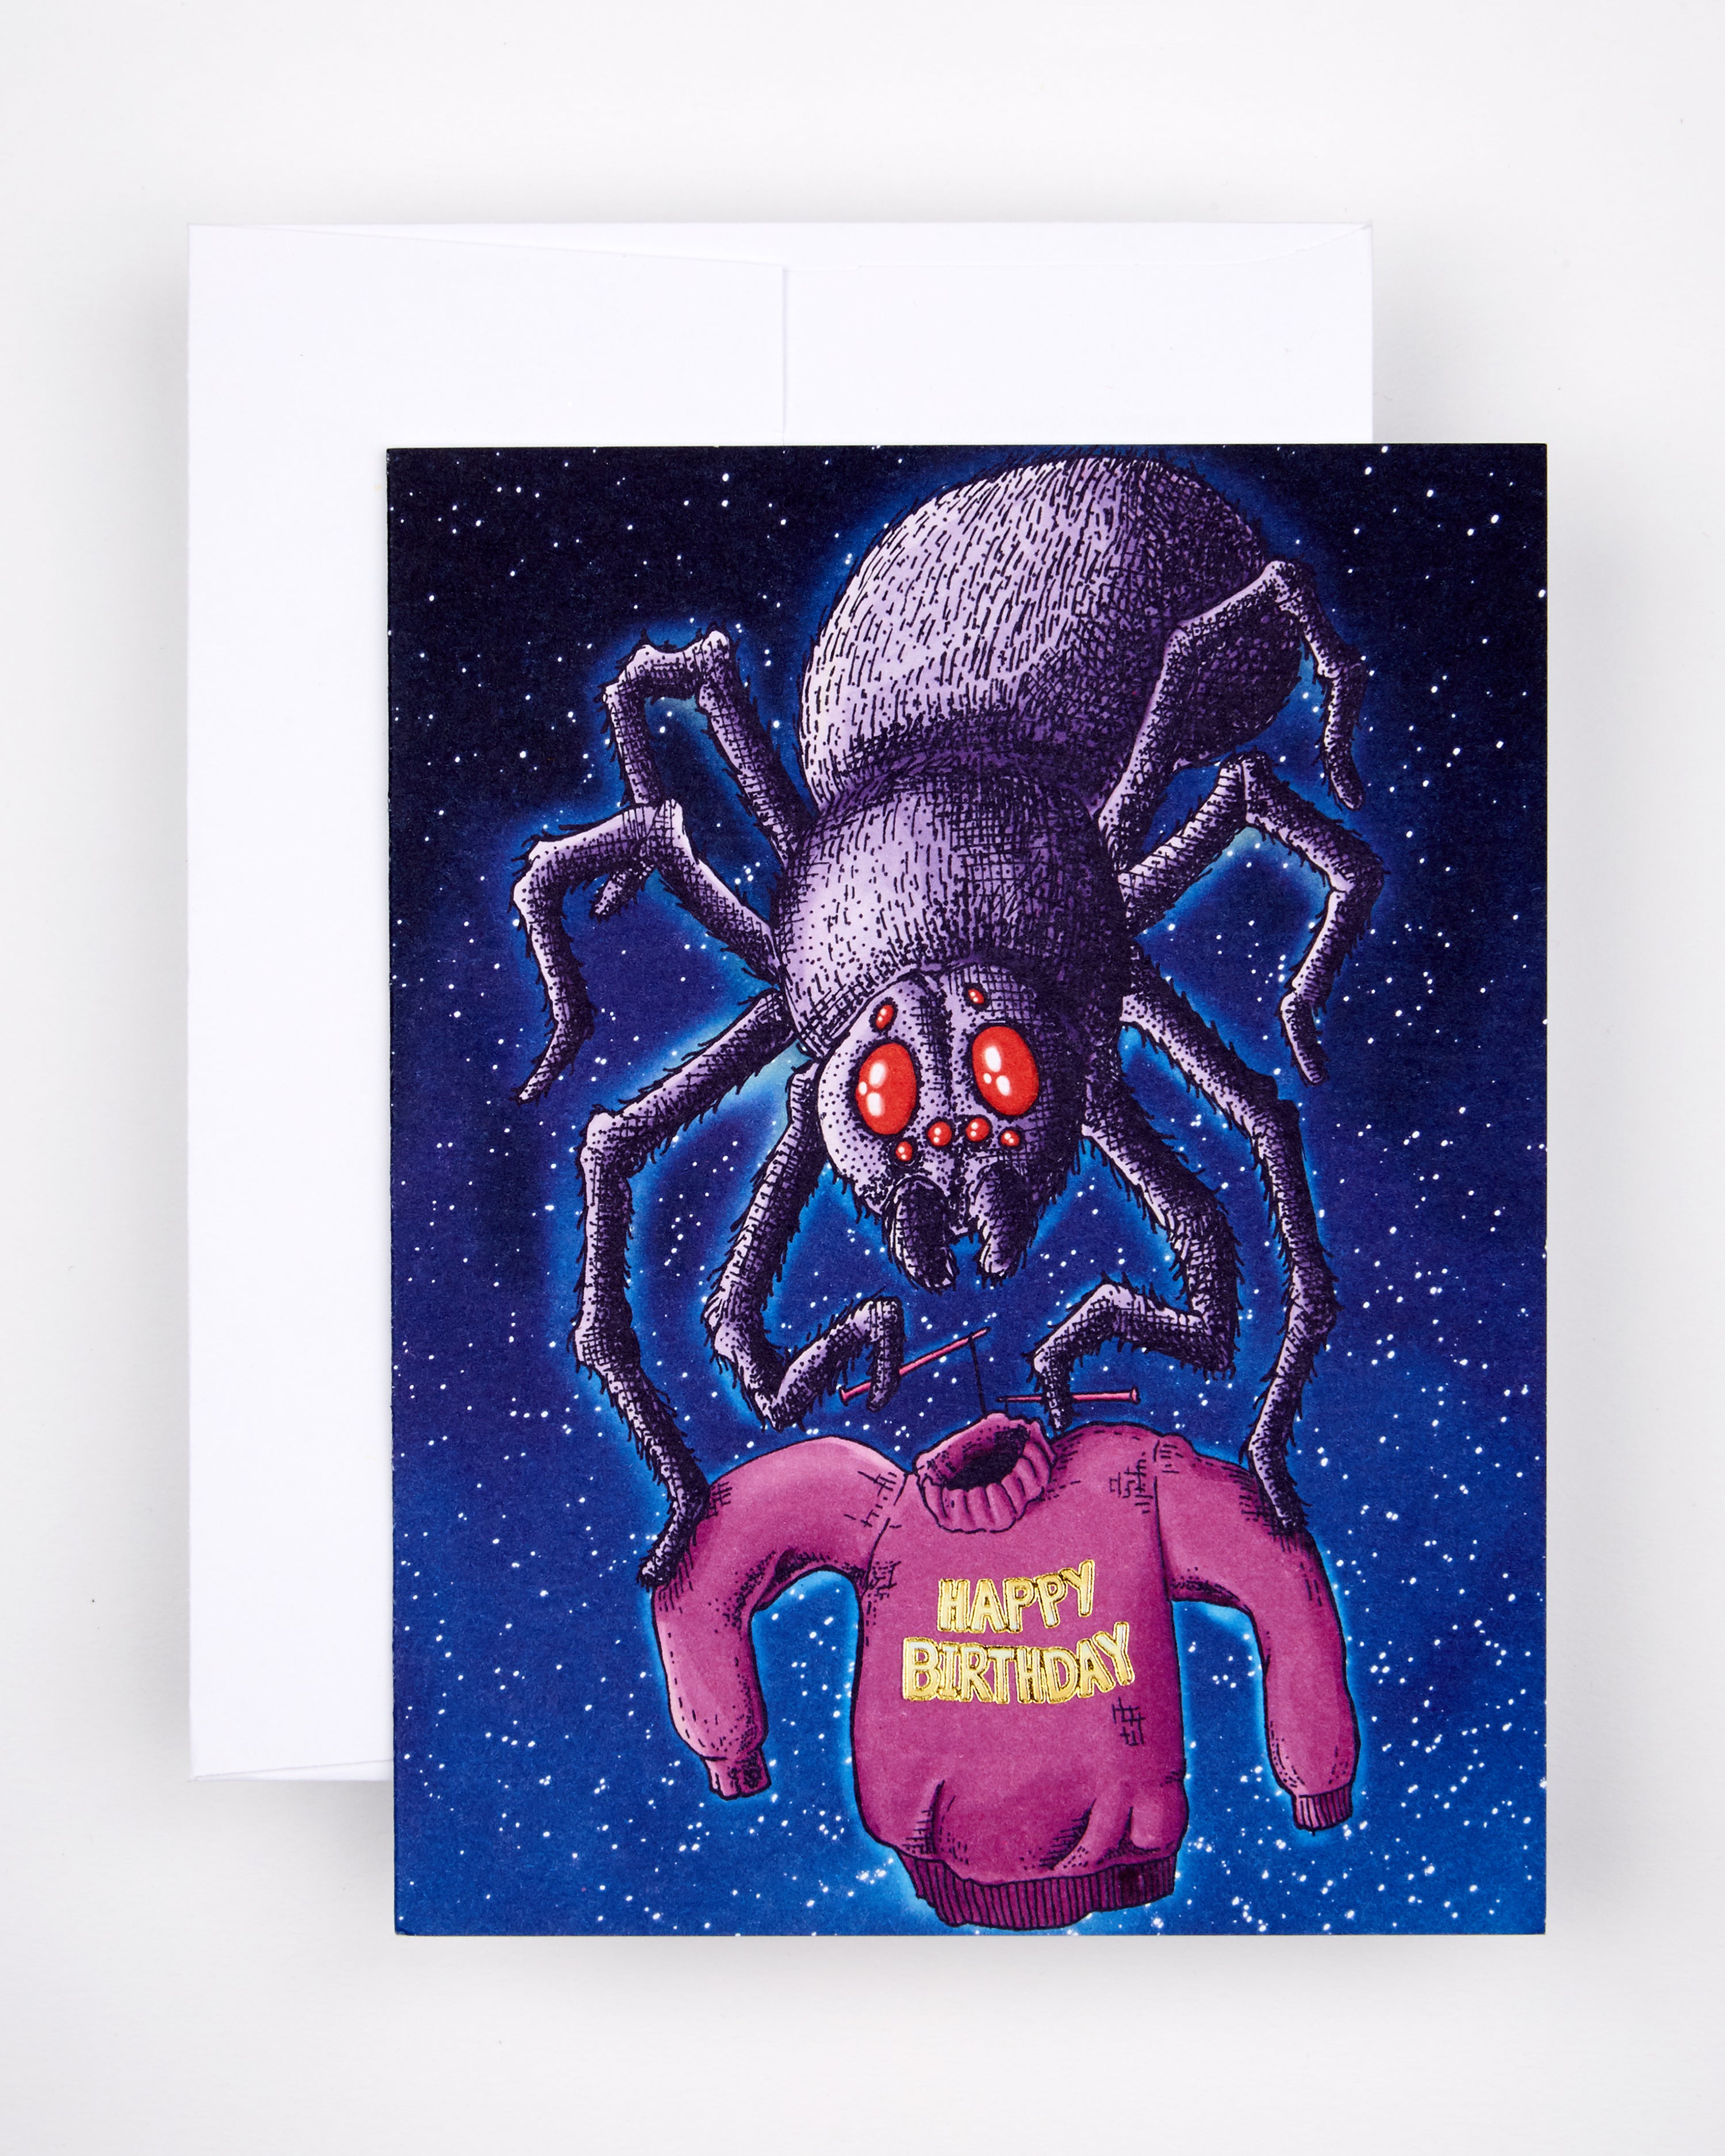 Greeting card with the text Happy Birthday on a sweater knitted by a spider